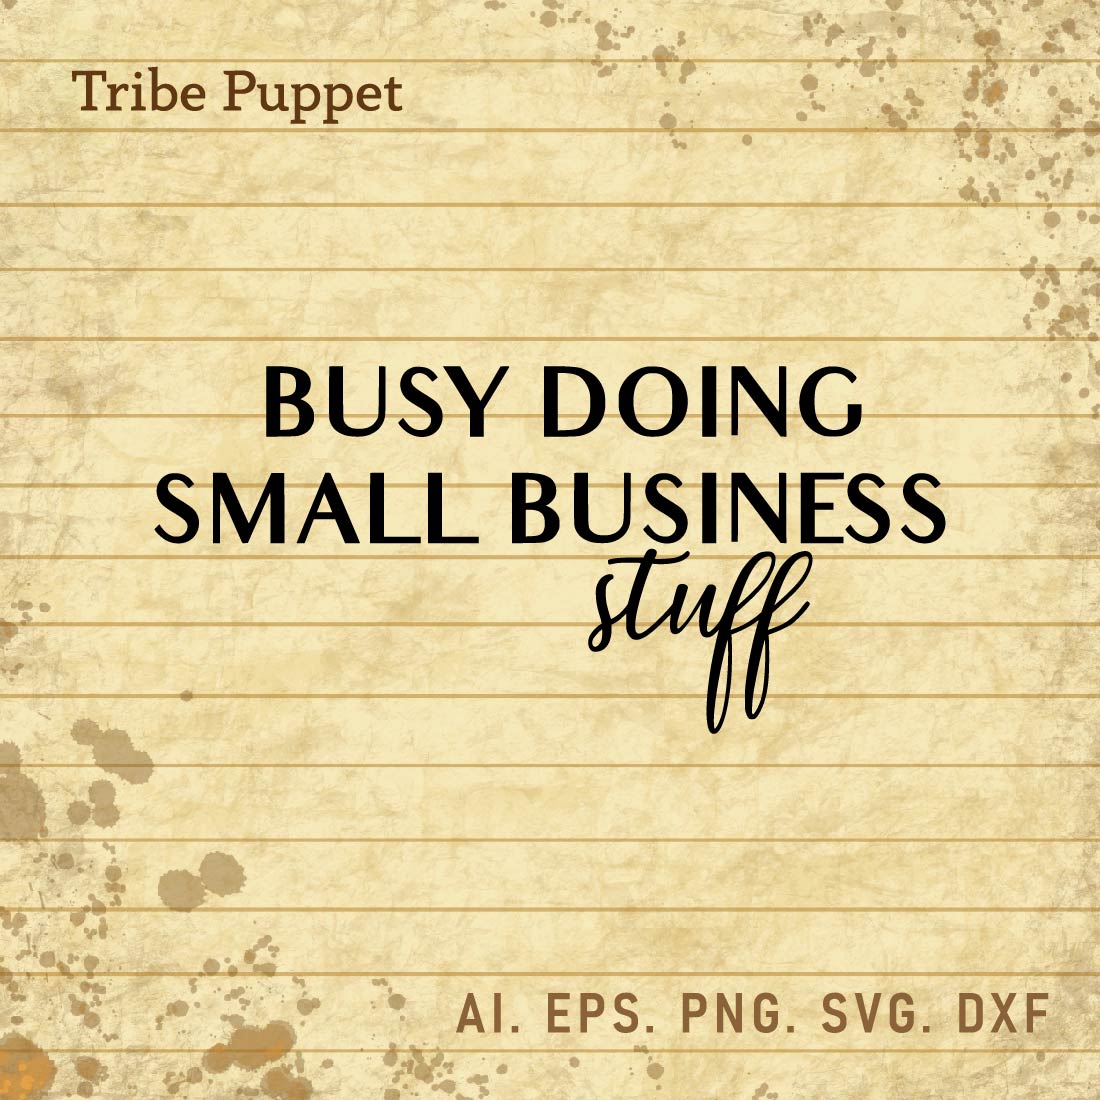 Small business Quotes cover image.